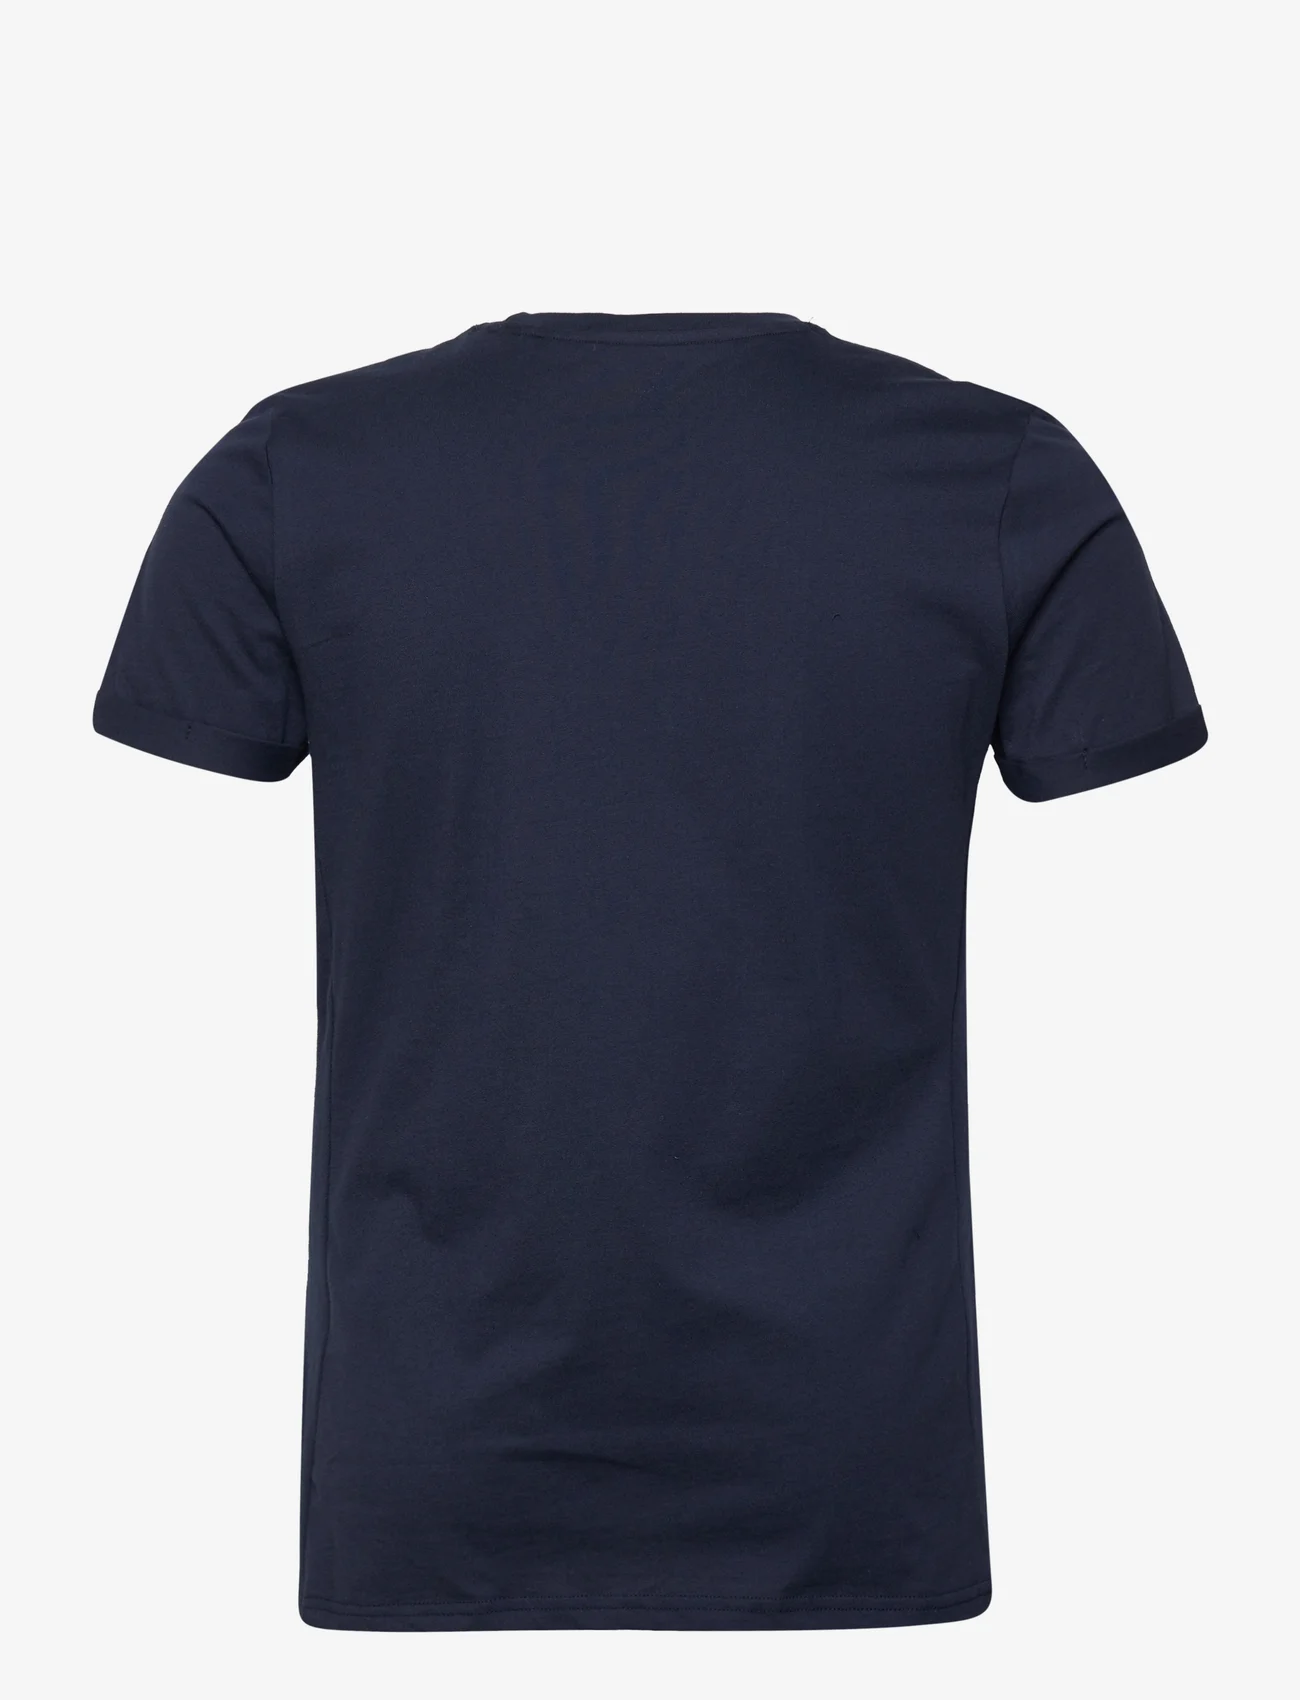 Urban Pioneers - Andre Tee - t-shirts - navy - 1